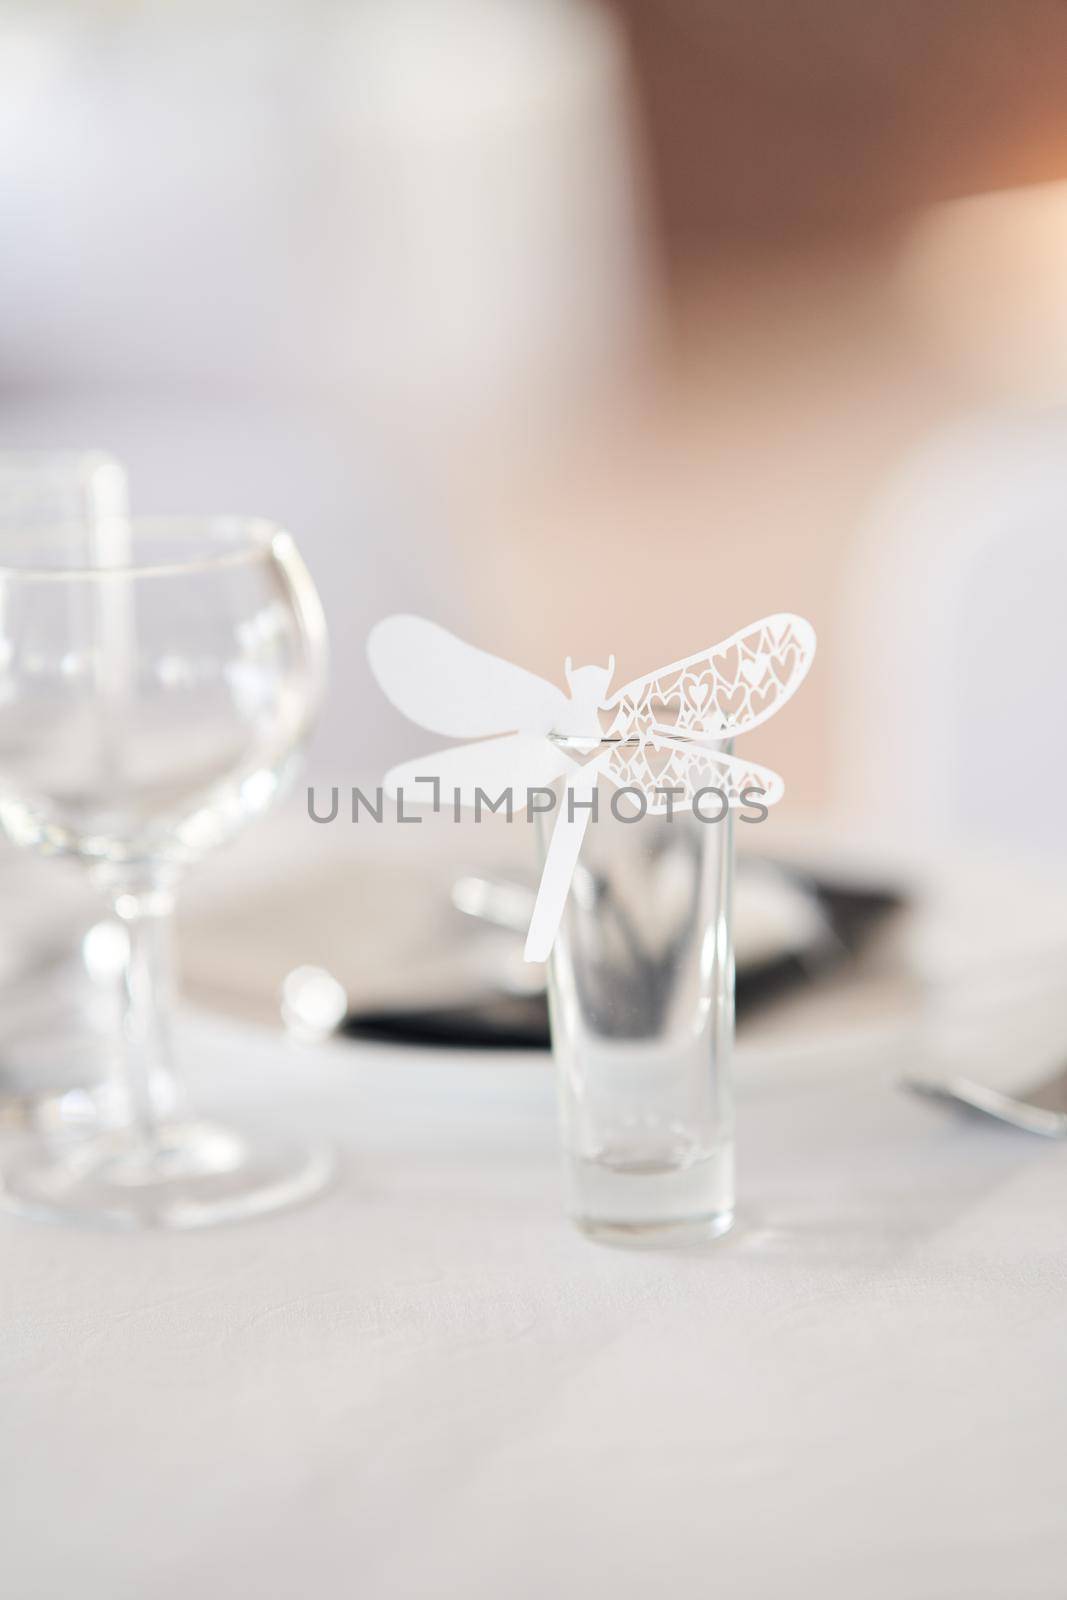 Table set for an event party or wedding reception. Empty wine glasses at a wedding celebration.